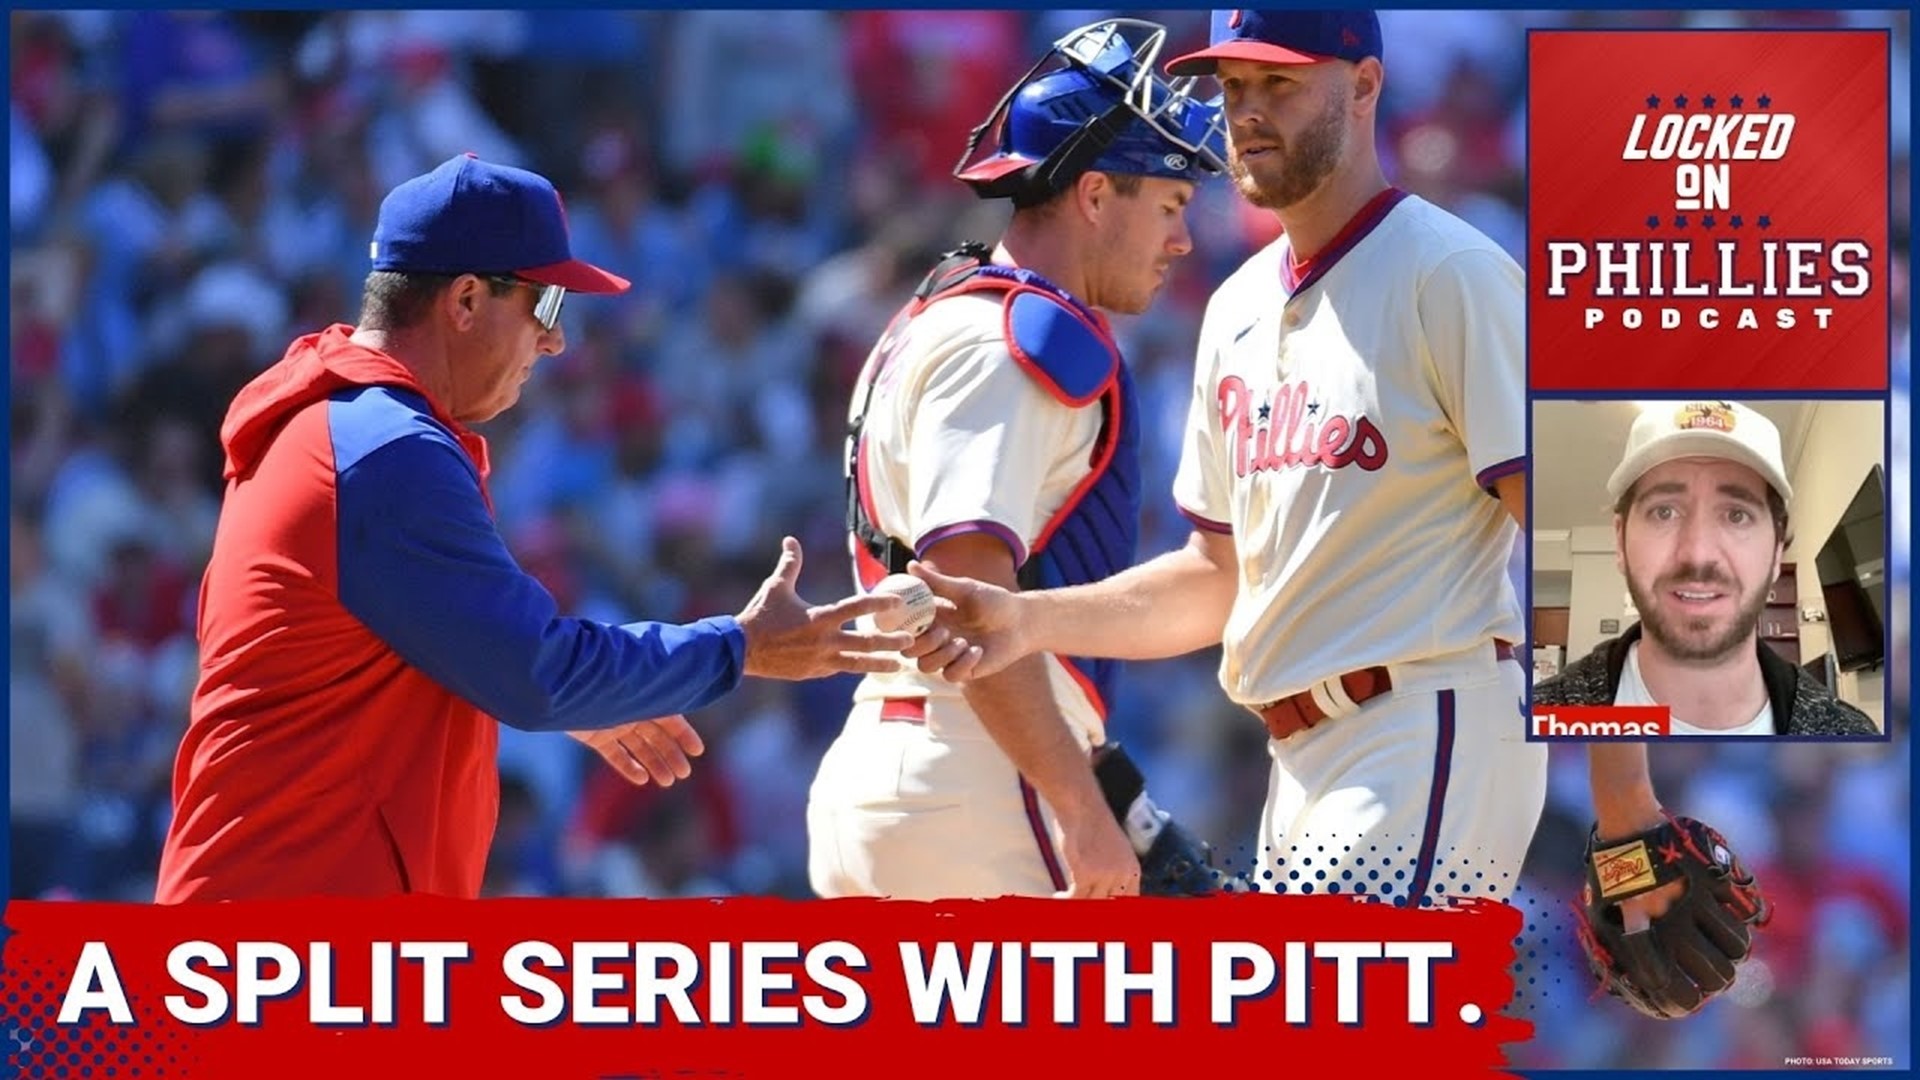 In today's episode, Connor reacts to the Philadelphia Phillies' series split with the Pittsburgh Pirates over the weekend.